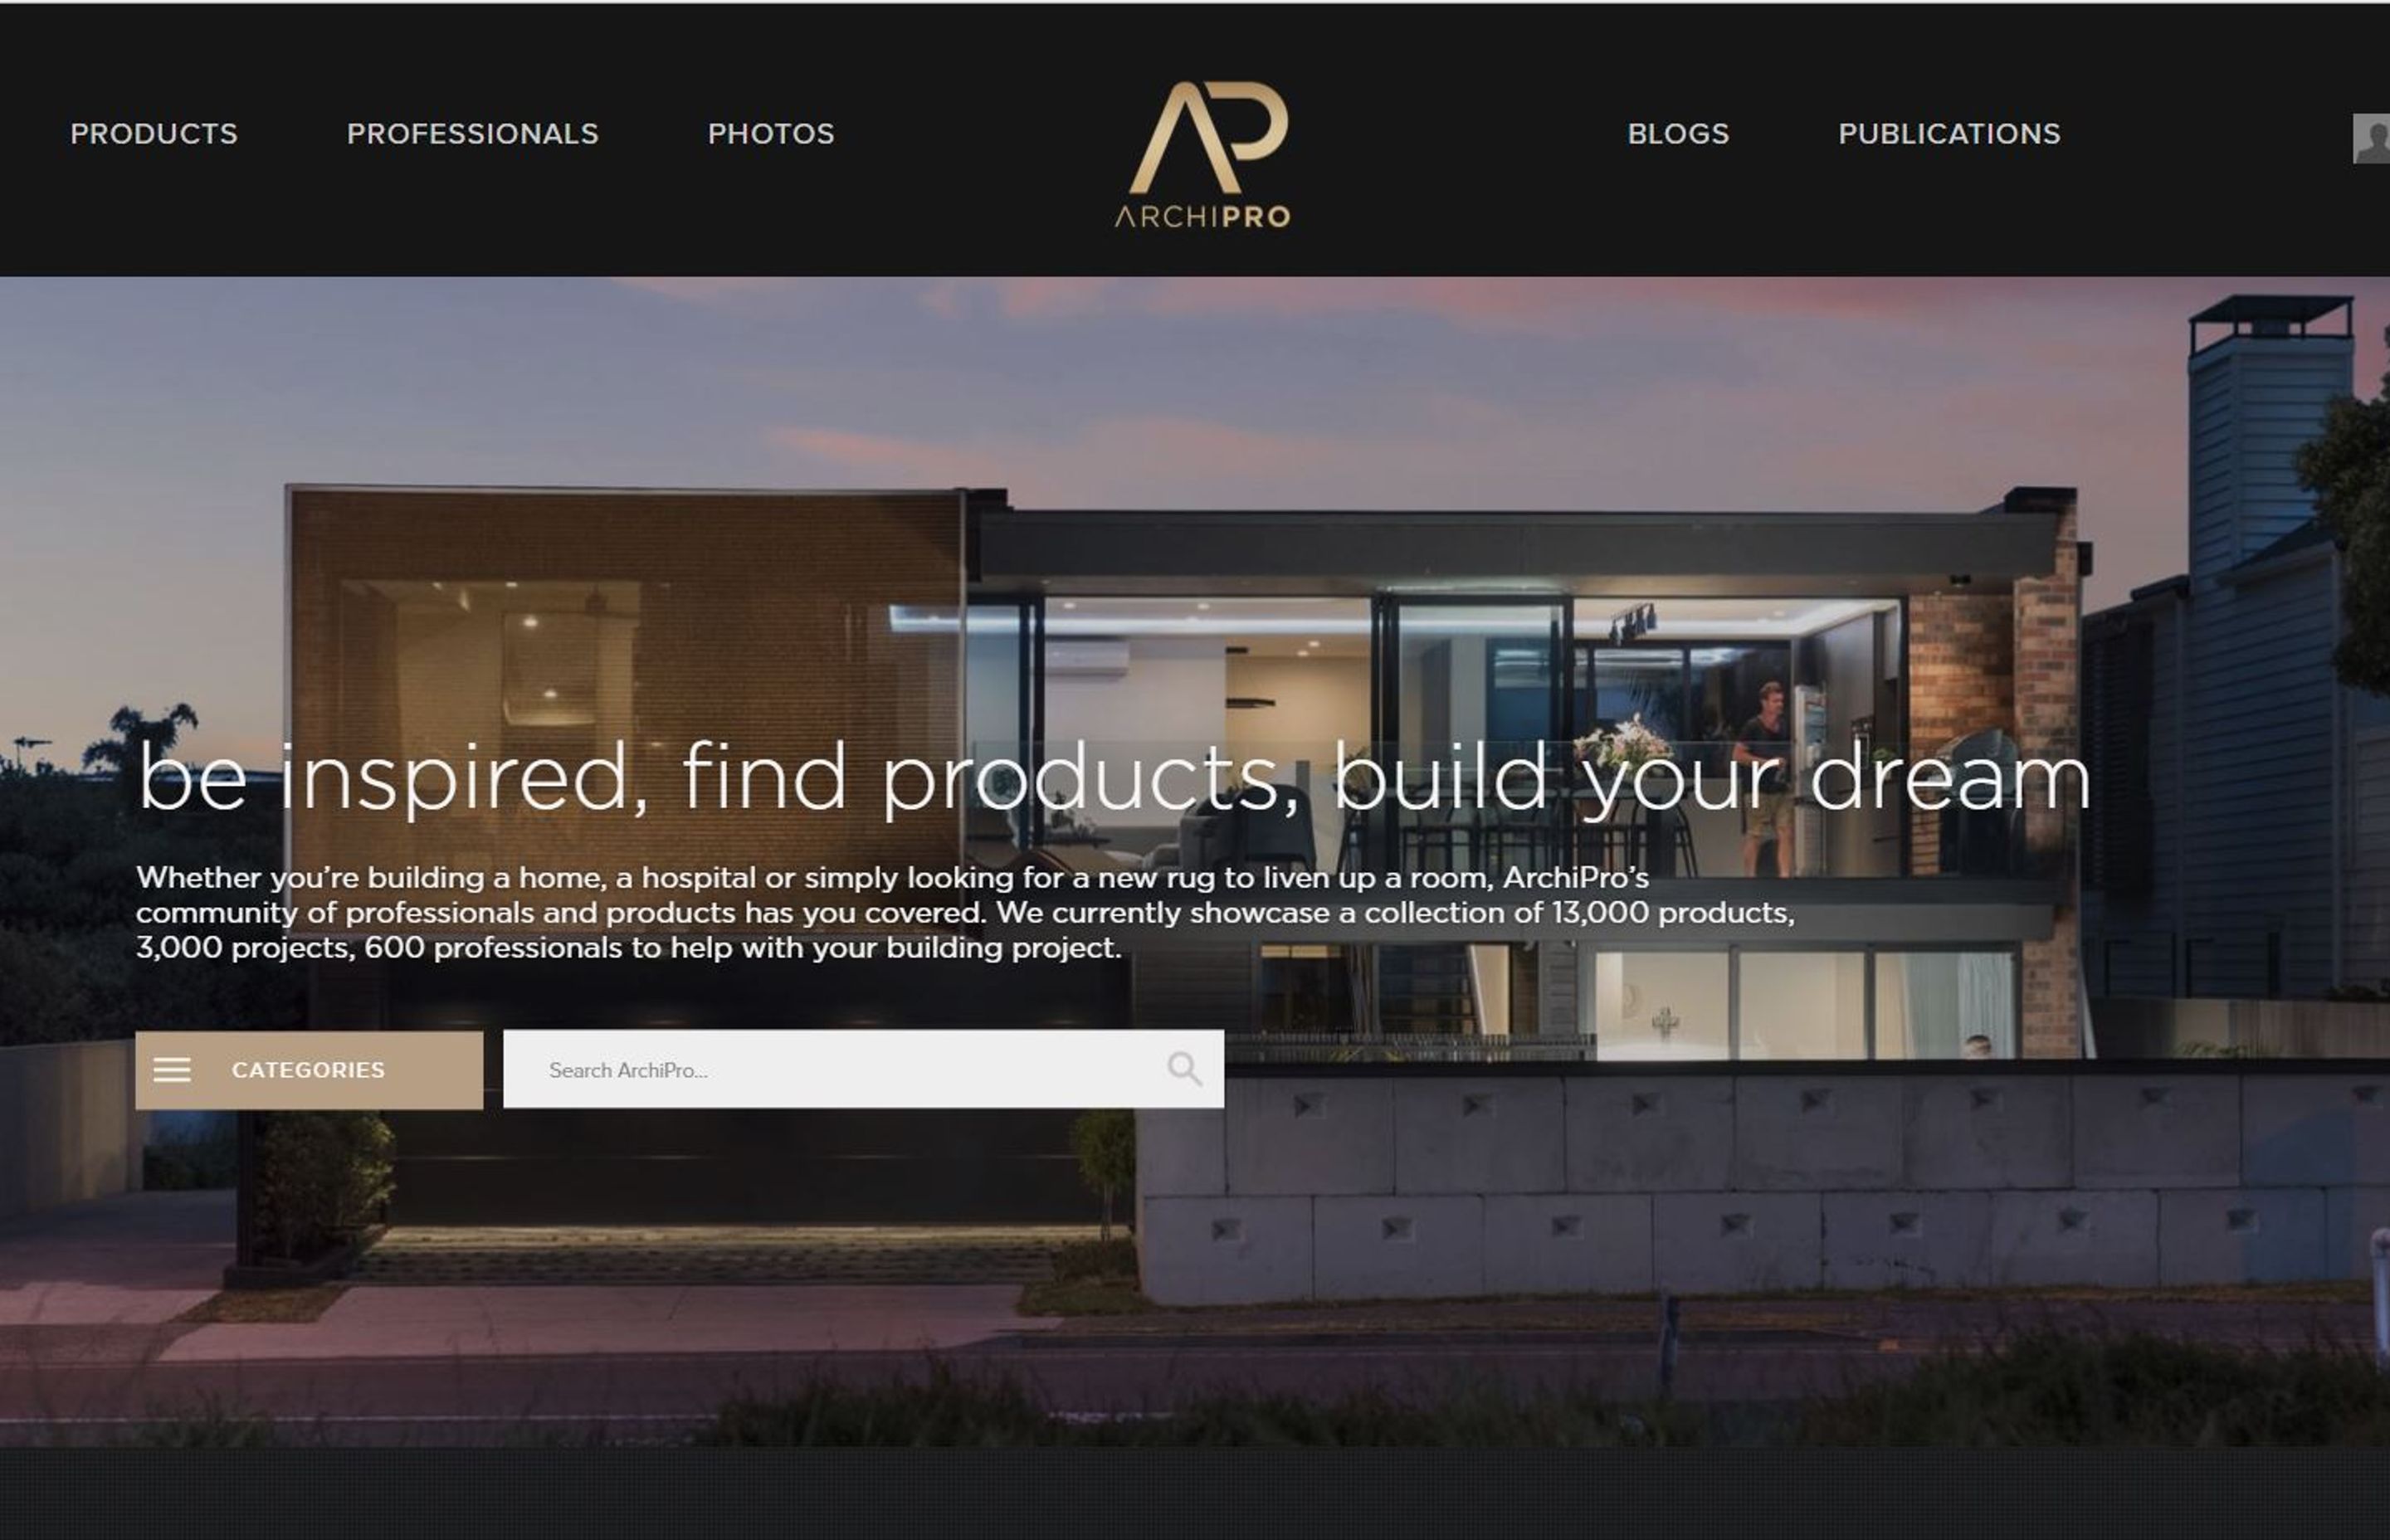 The ever evolving ArchiPro homepage